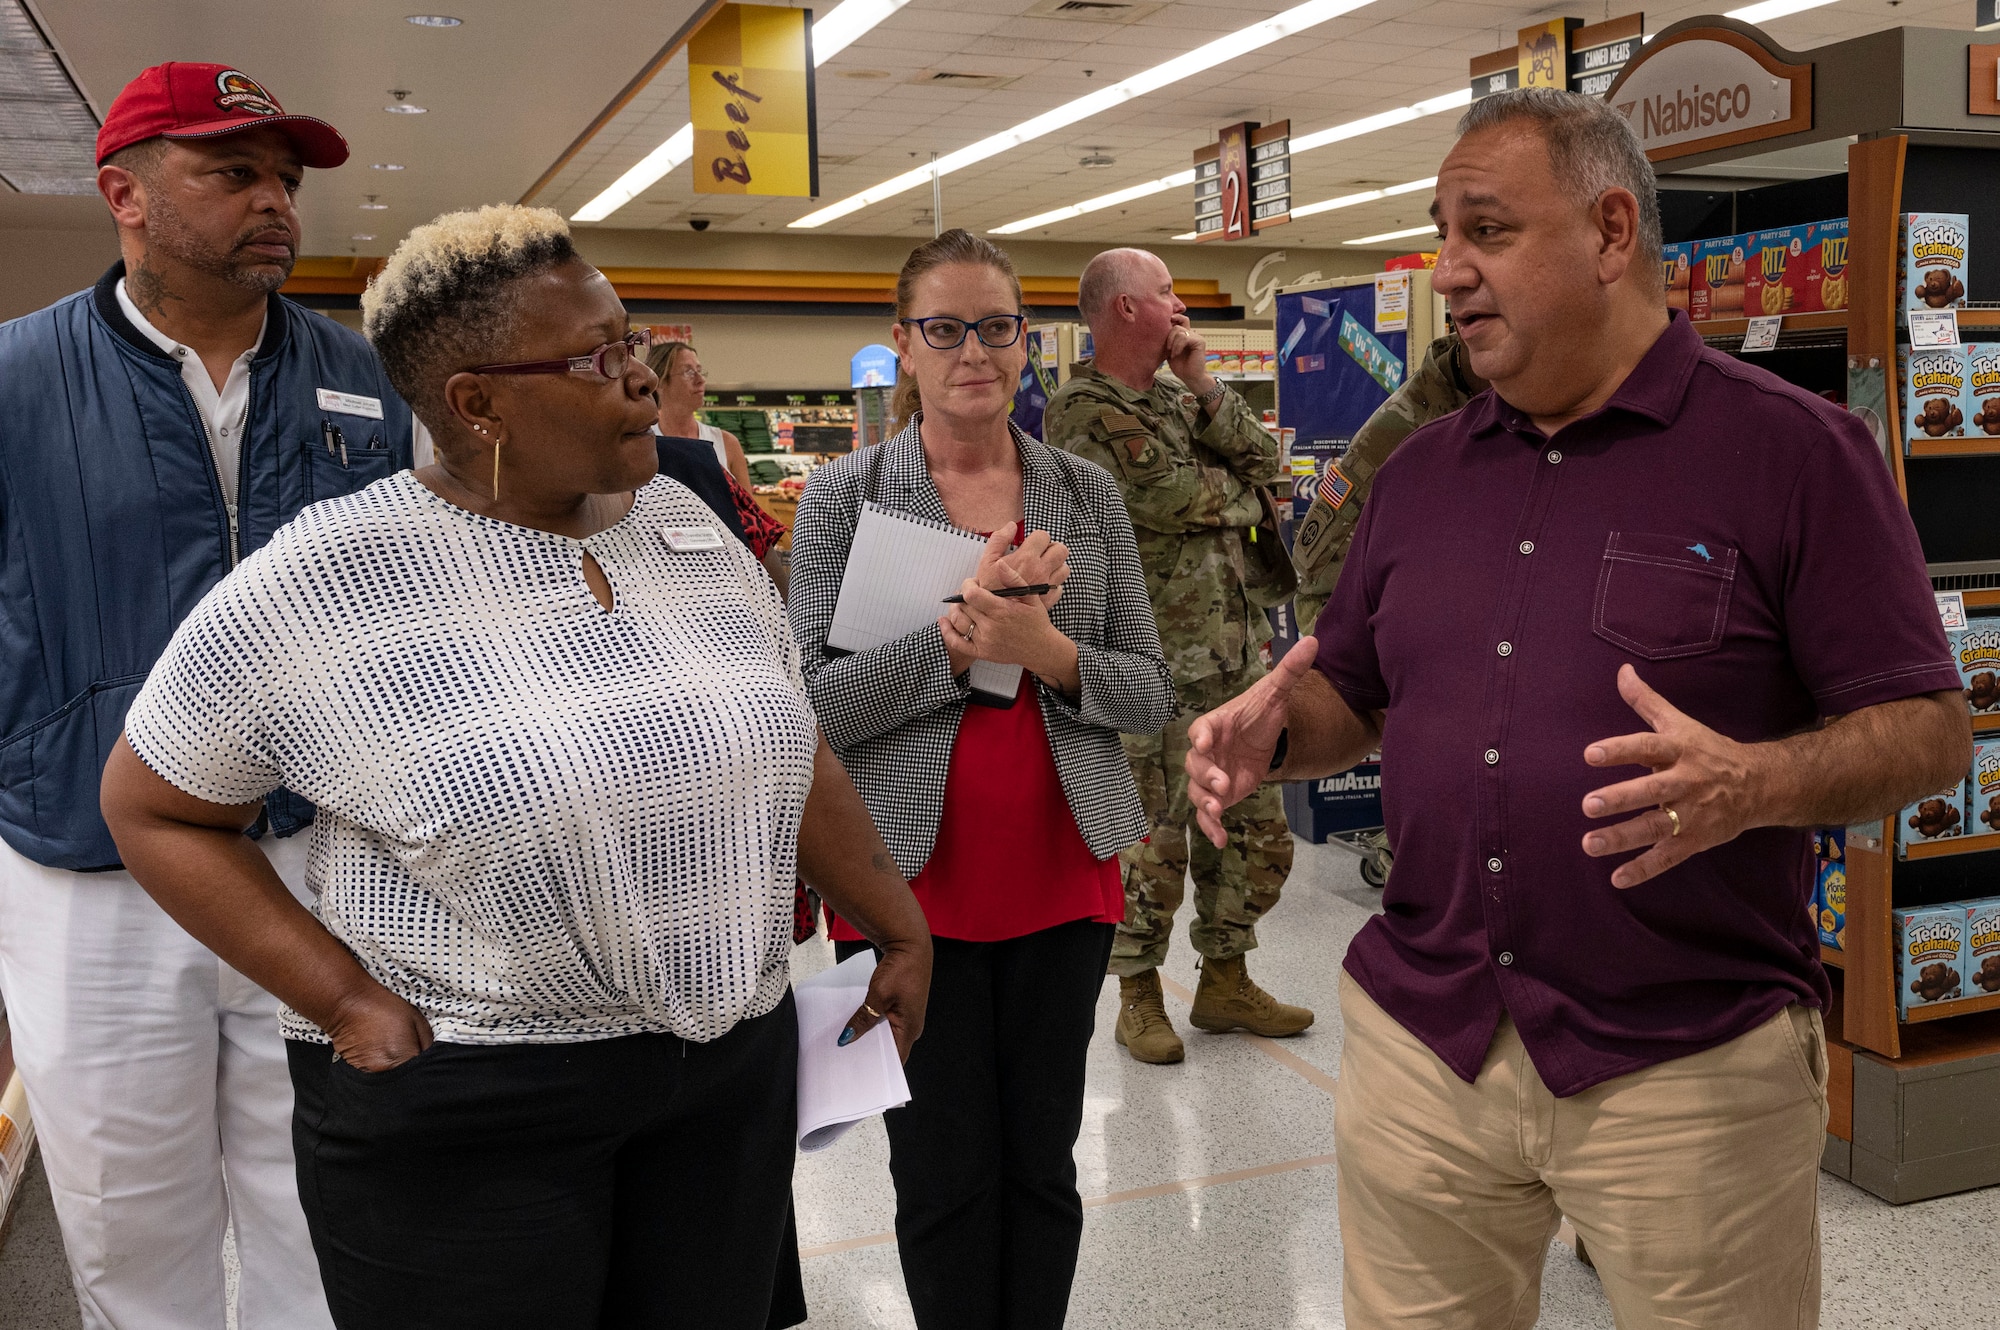 Gilbert R. Cisneros Jr., Under Secretary of Defense for Personnel and Readiness, right, discusses the capabilities of Holloman’s commissary with Dwinette Martin, Defense Commissary Agency officer, during a familiarization tour at Holloman Air Force Base, New Mexico, Aug. 1, 2023. Cisneros and Wagner interacted with Airmen and other personnel across the wing to better understand the 49th Wing’s mission of aircrew training and discuss ways to improve Team Holloman’s quality of life. (U.S. Air Force photo by Airman 1st Class Isaiah Pedrazzini)